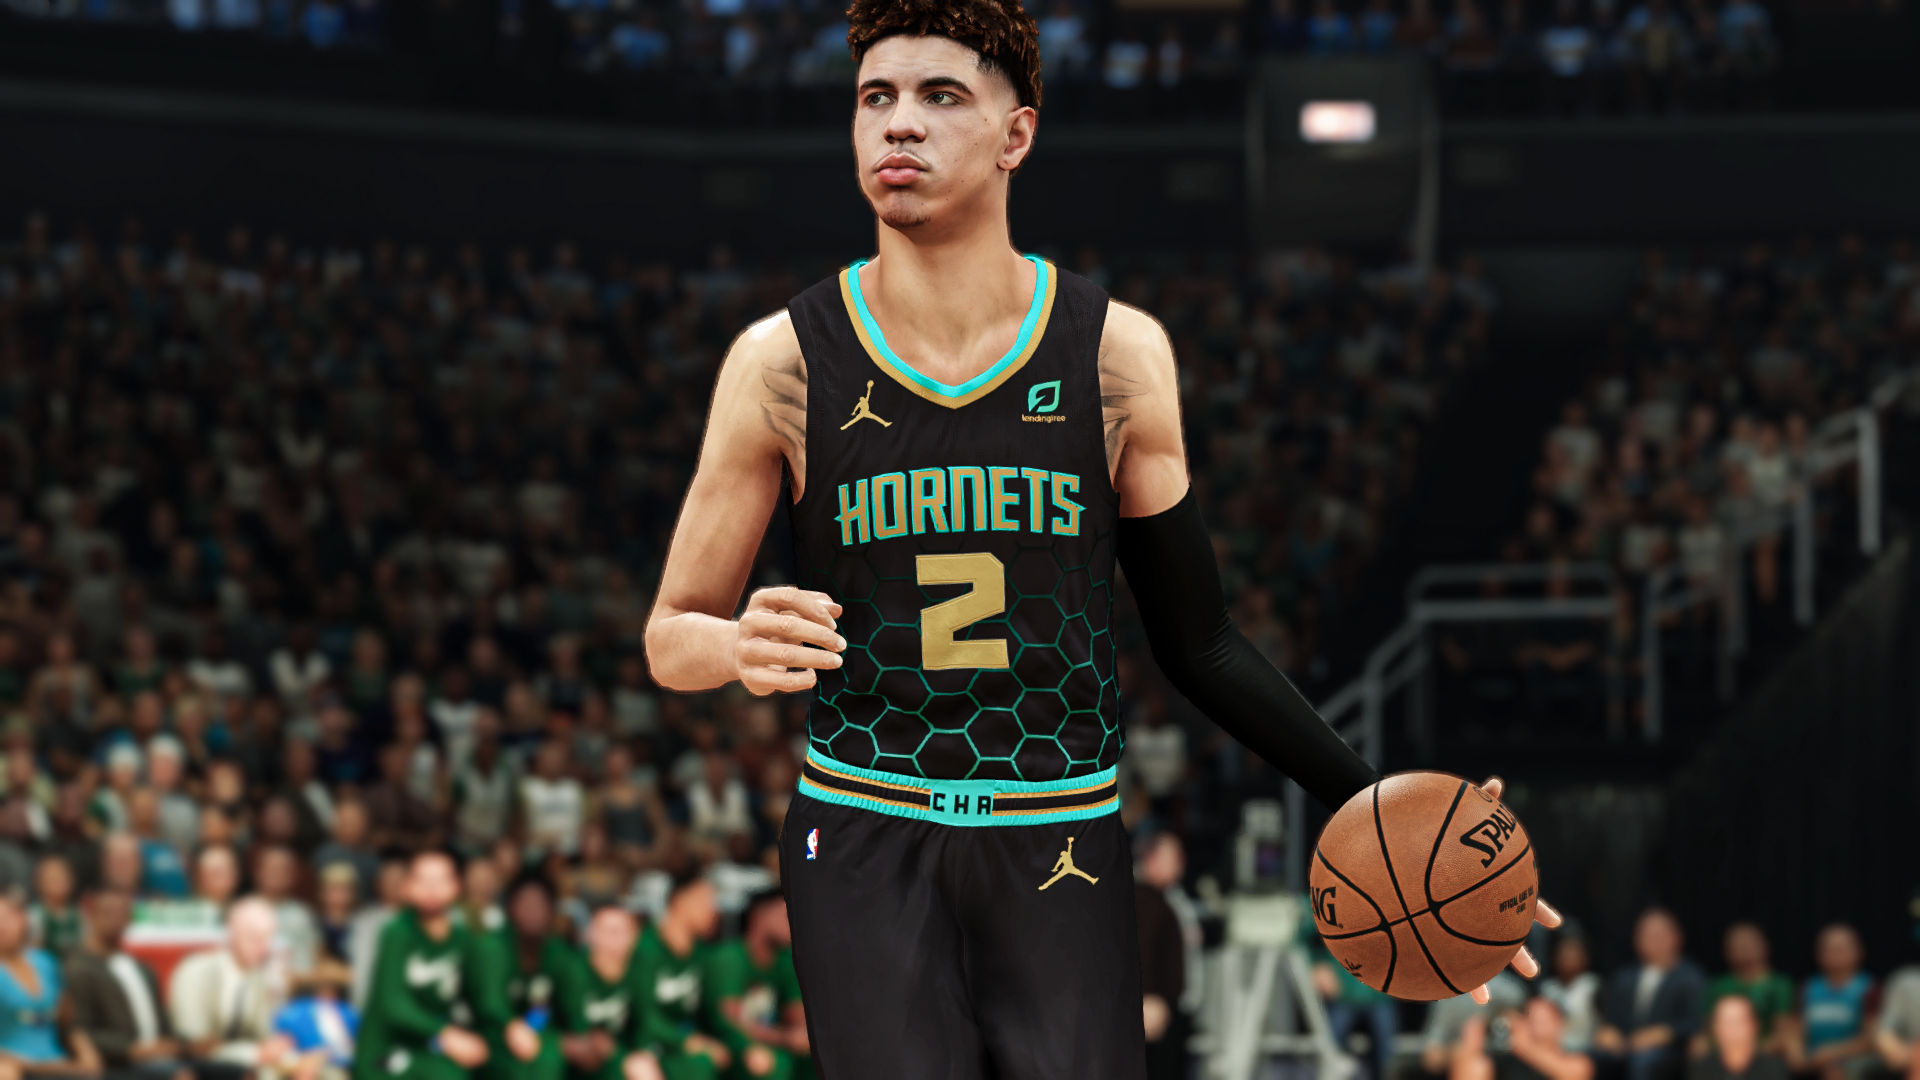 Hornets jersey concept I made (ig: Lucsdesign91) doing a concept